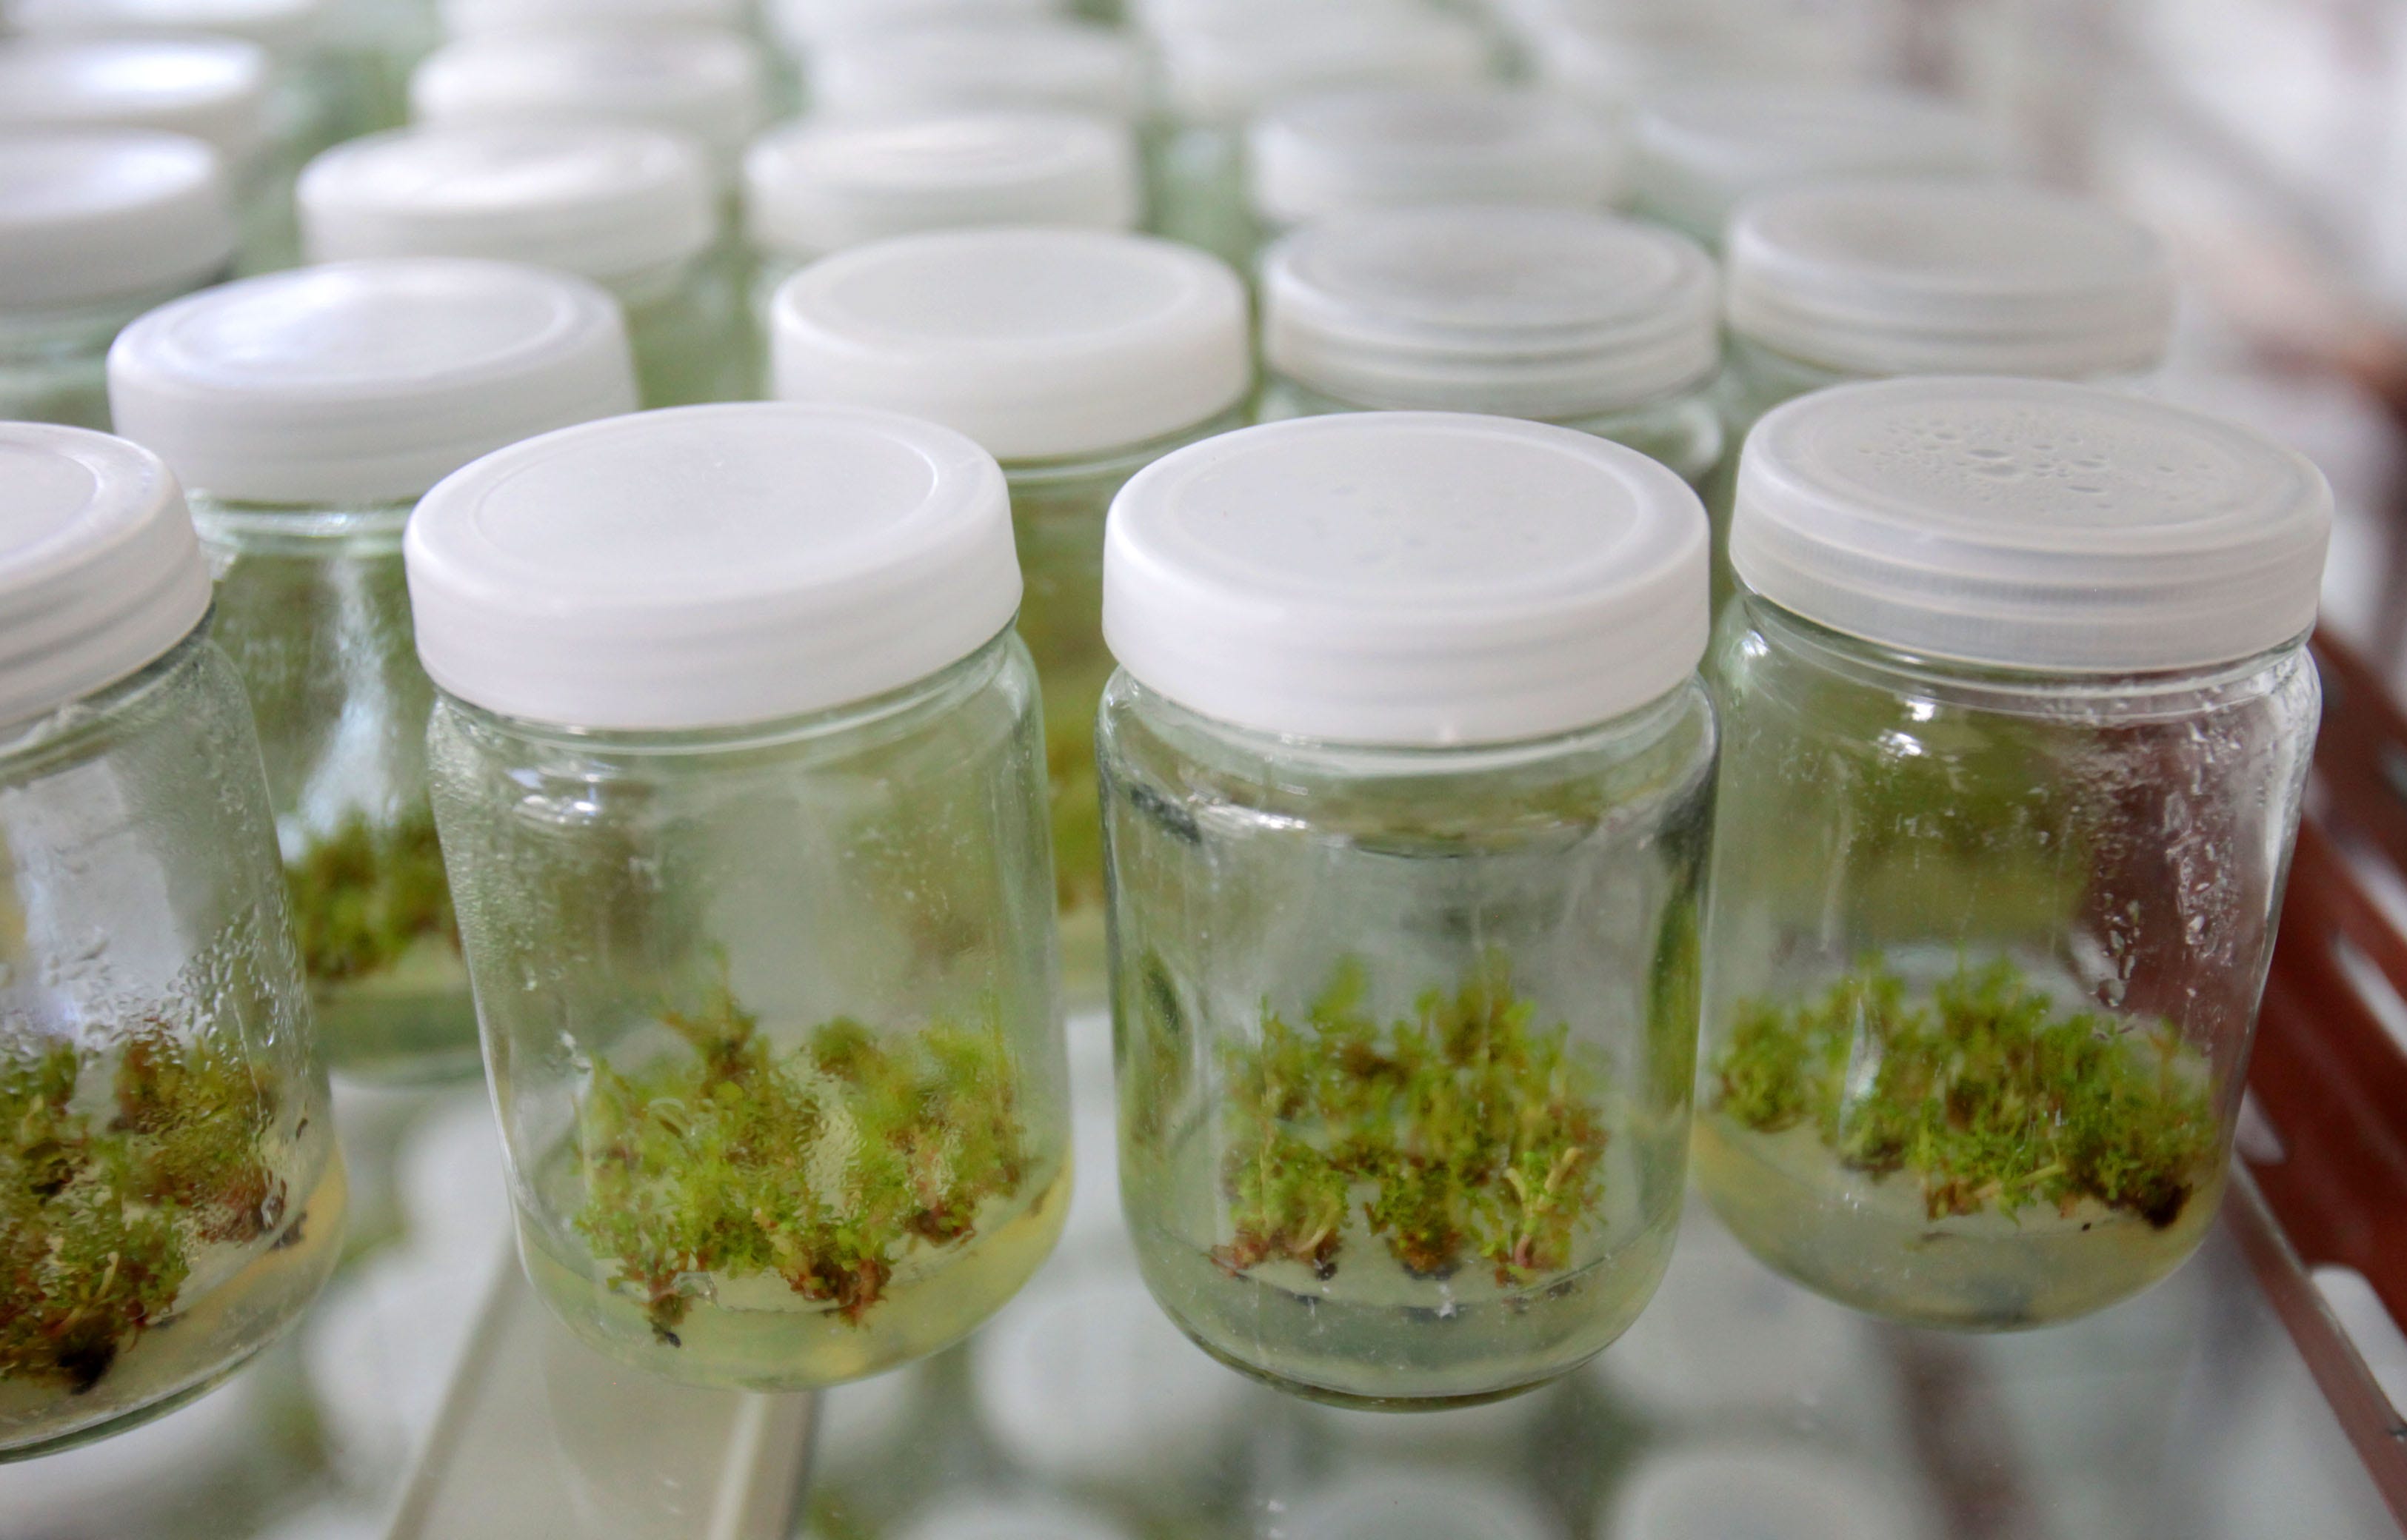 Paper Pixel Nursery  - Laboratory jars are seen with what's refereed to as "cuttings" growing in a climate controlled incubation areas at the at the Asia Pulp and Paper nursery center tissue culture laboratory in Dingan, Hainan located in the north east Hainan provence, a tropical part of China. The nursery is one of two APP nurseries in China where they select the tallest trees that yield the most pulp, clone them and plant the cloned seedlings. Those tallest of these trees jokingly are called ÒYoa Mings.Ó Using tissue culture technology, lab technicians use surgical instruments to transplant tissue samples from the select Yoa Mings into cultures in petri-dish like jars, which grow the seedling in climate controlled incubation areas. September 12 , 2012.   Photo by Mike De Sisti / MDESISTI@JOURNALSENTINEL.COM